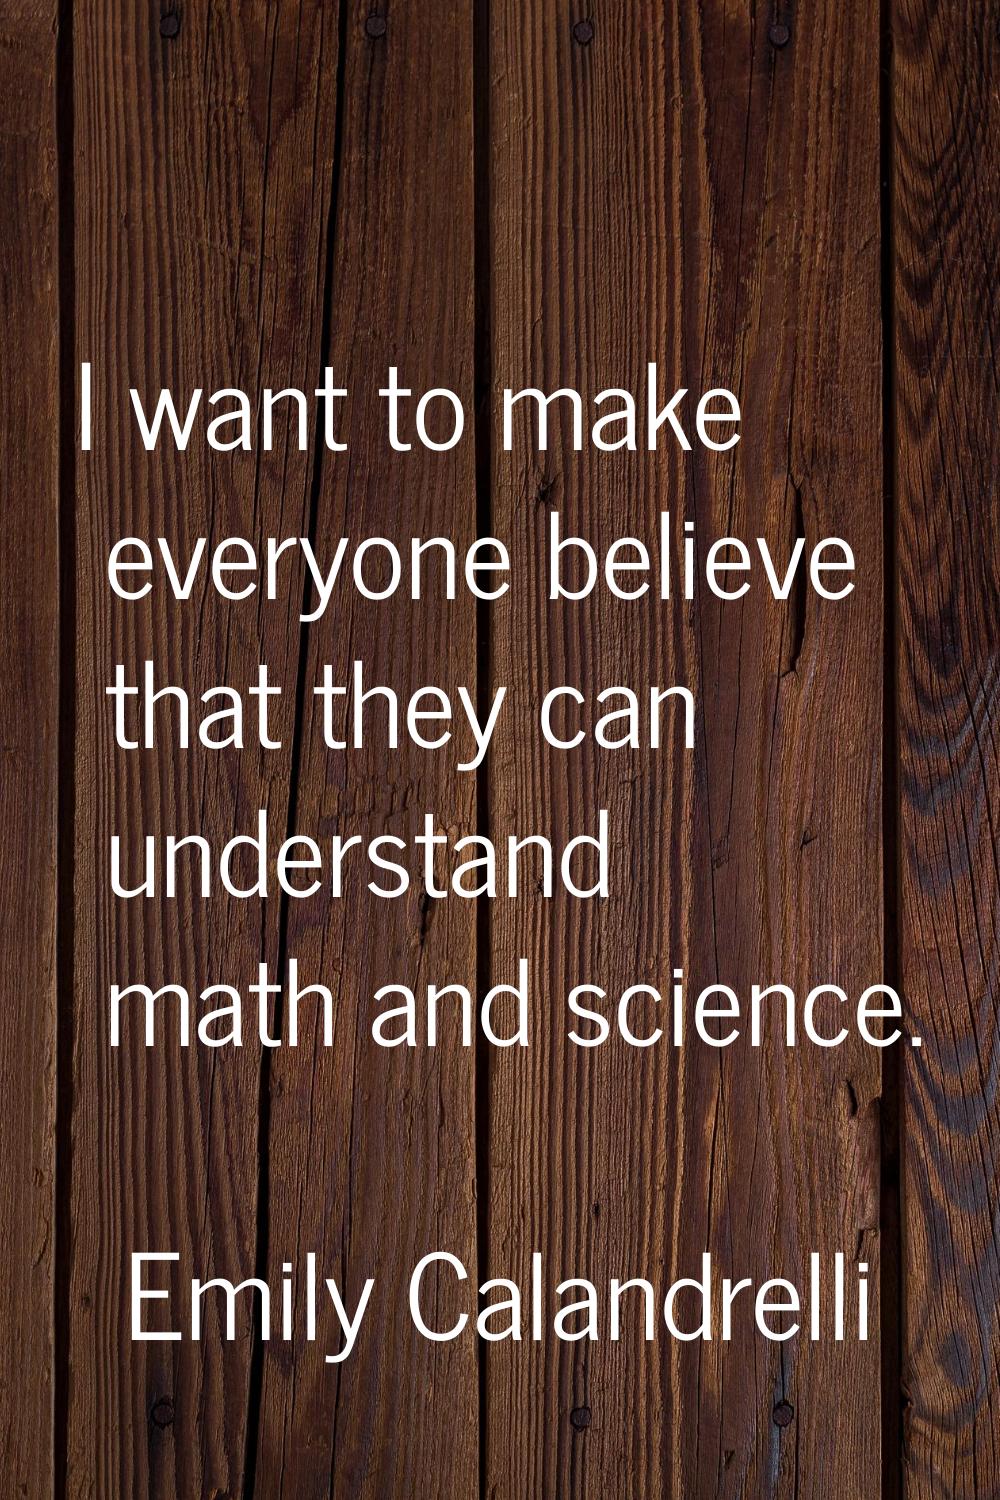 I want to make everyone believe that they can understand math and science.